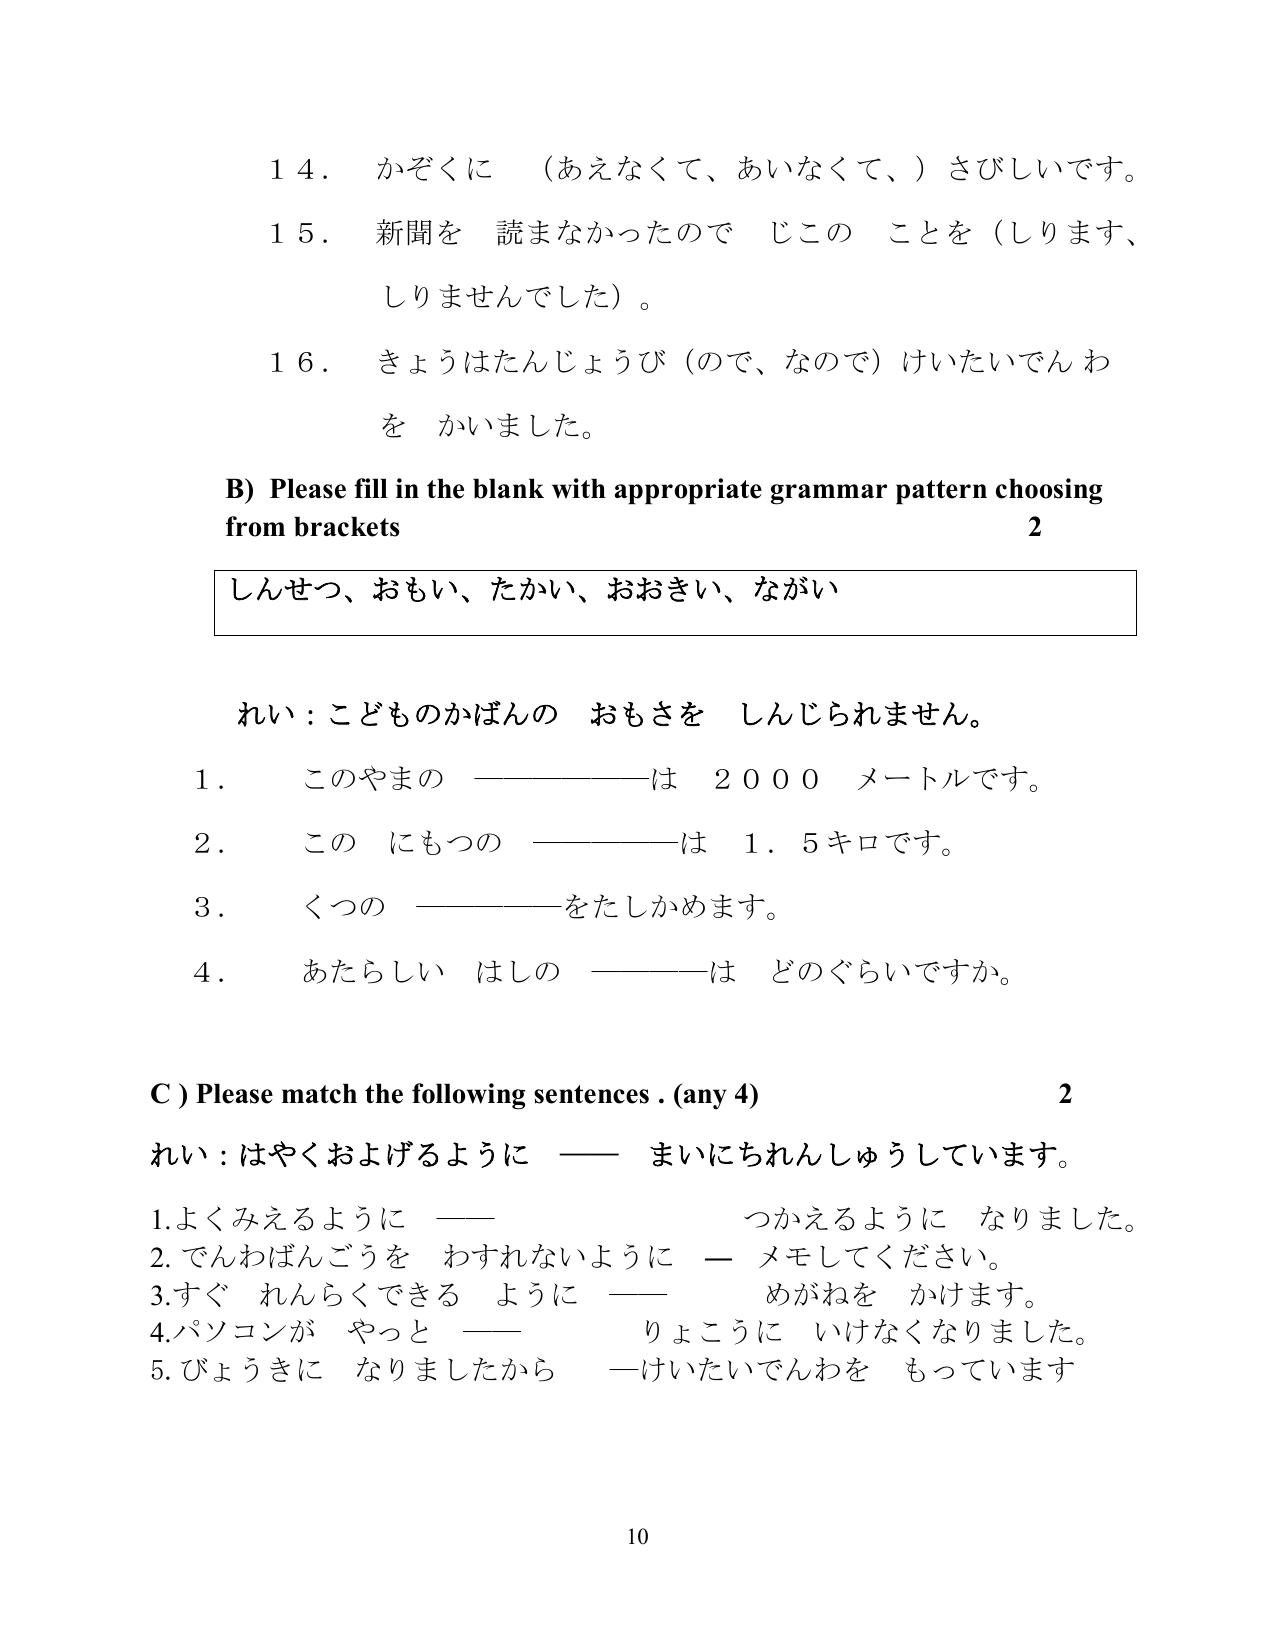 CBSE Class 12 Japanese -Sample Paper 2019-20 - Page 10